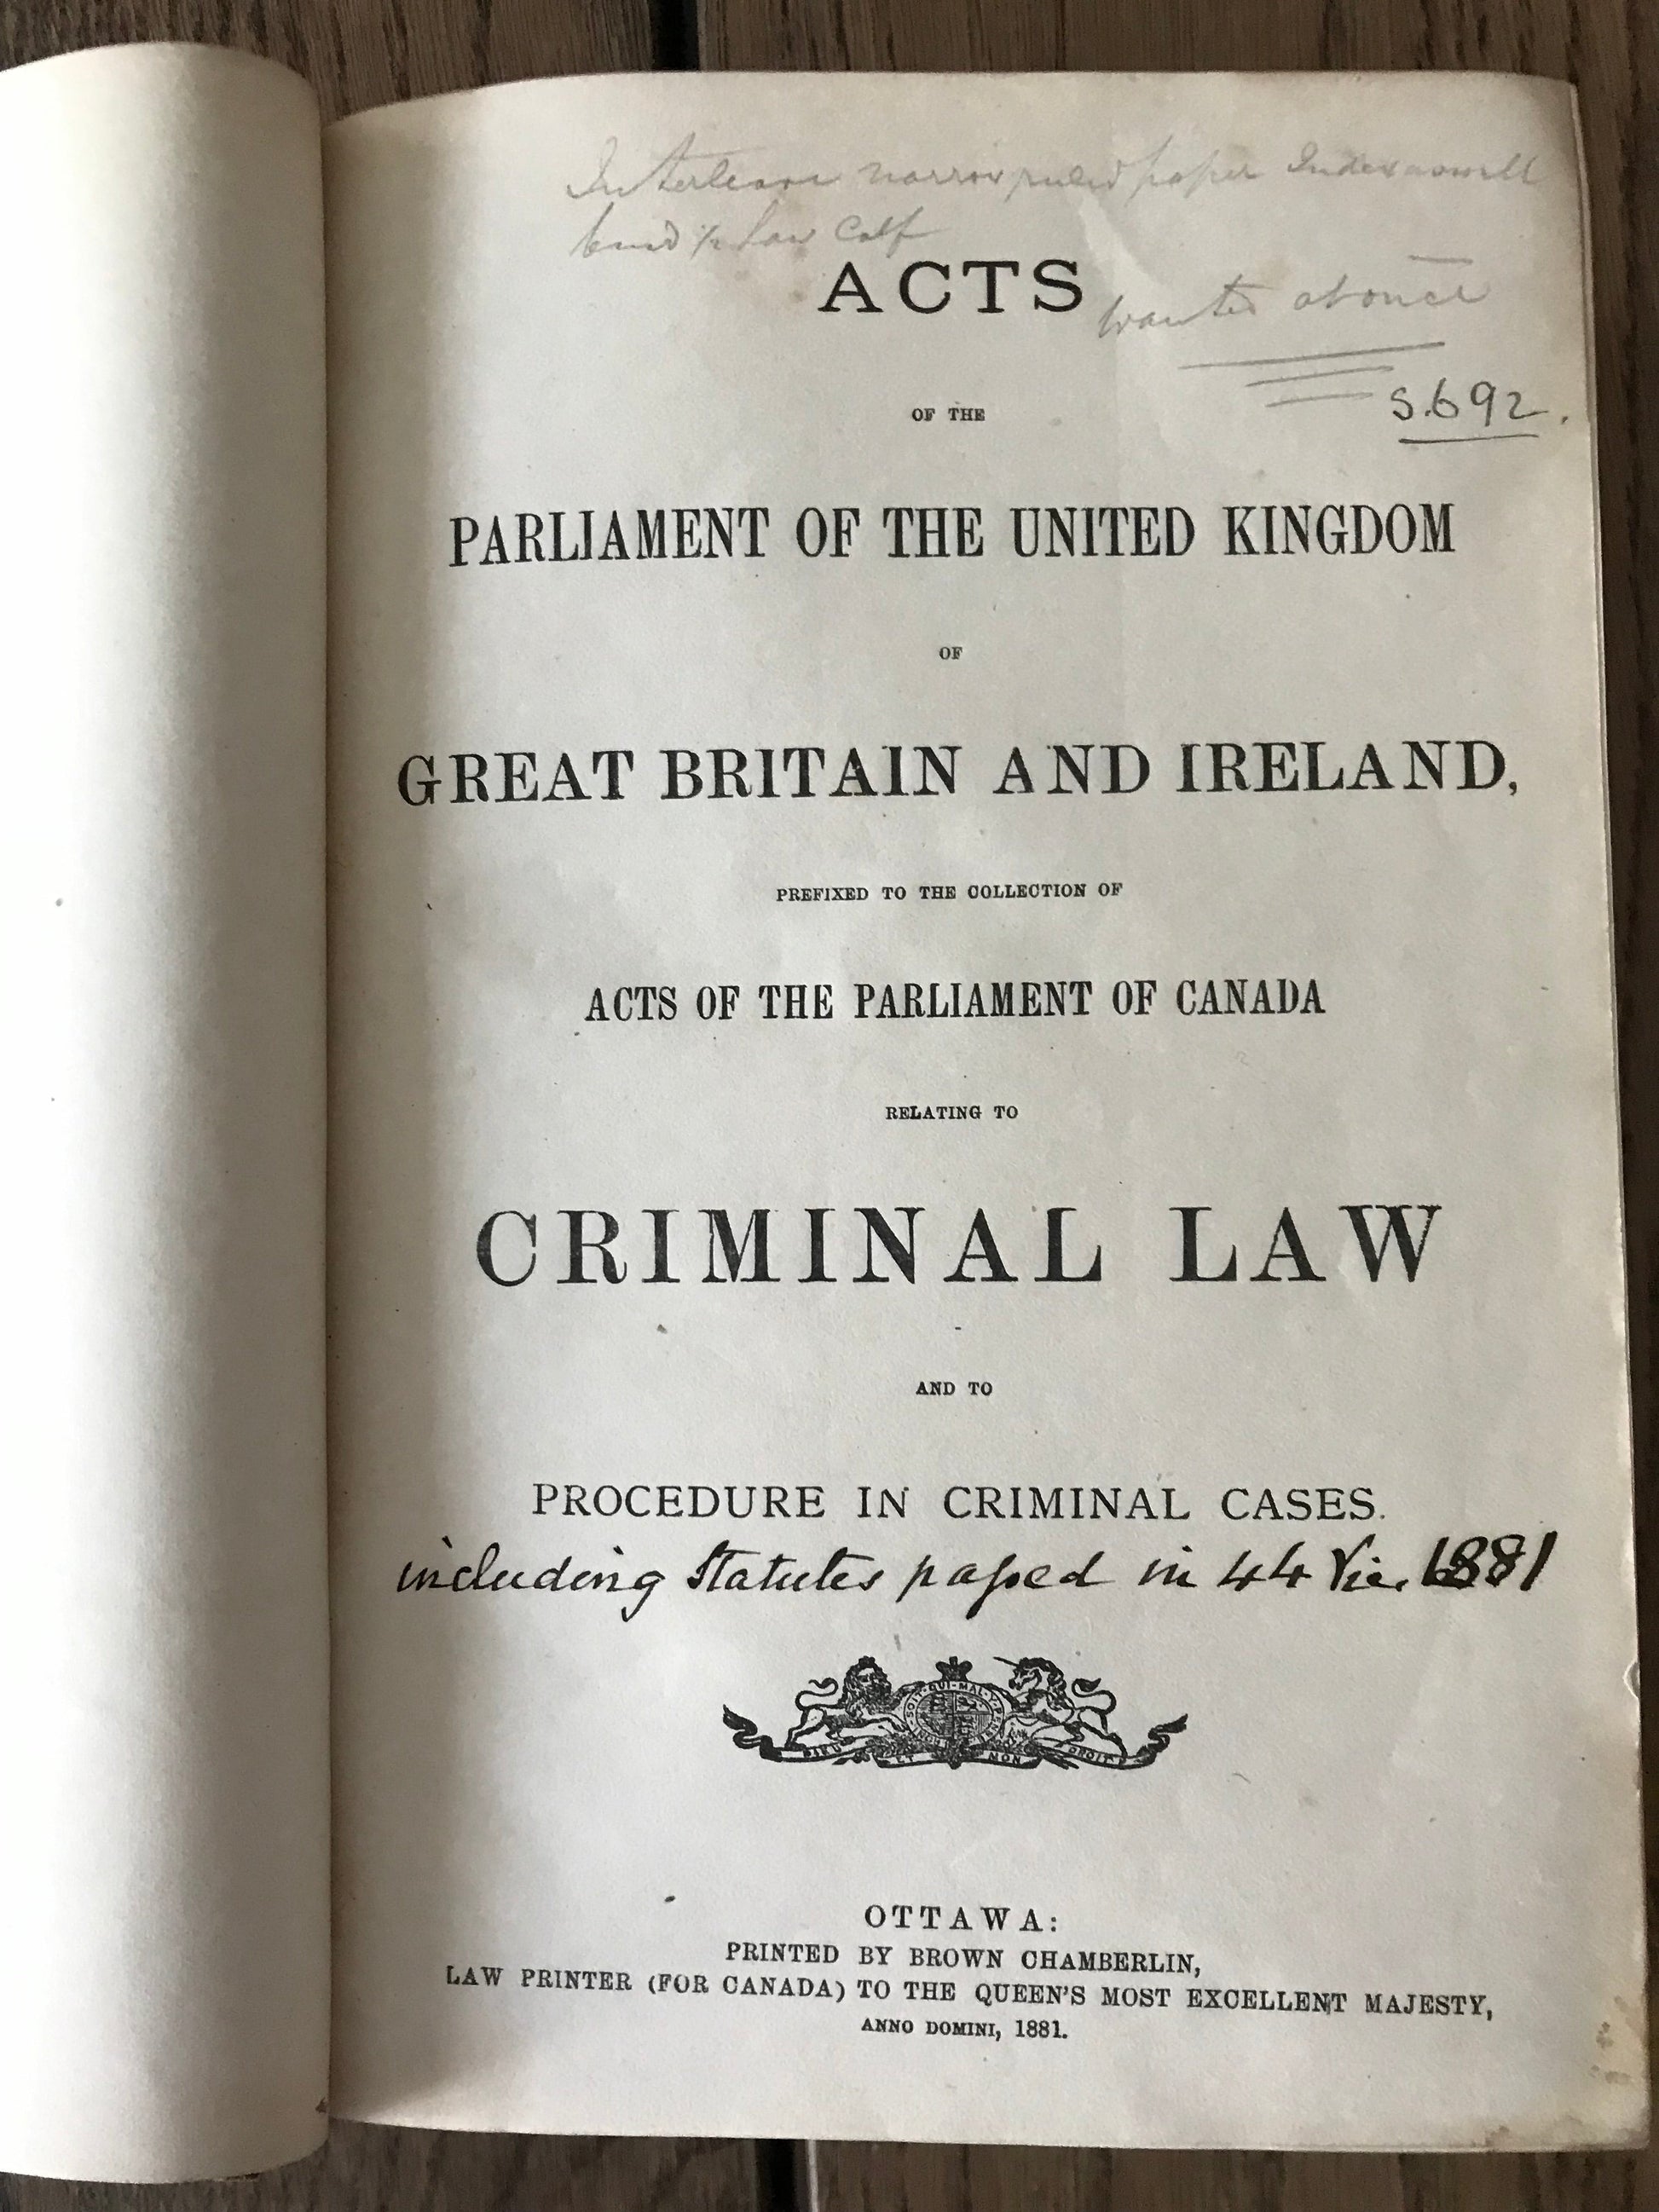 ACTS OF THE ...PARLIAMENT OF CANADA RELATING TO CRIMINAL LAW .... UNATTRIBUTED AUTHOR BooksCardsNBikes